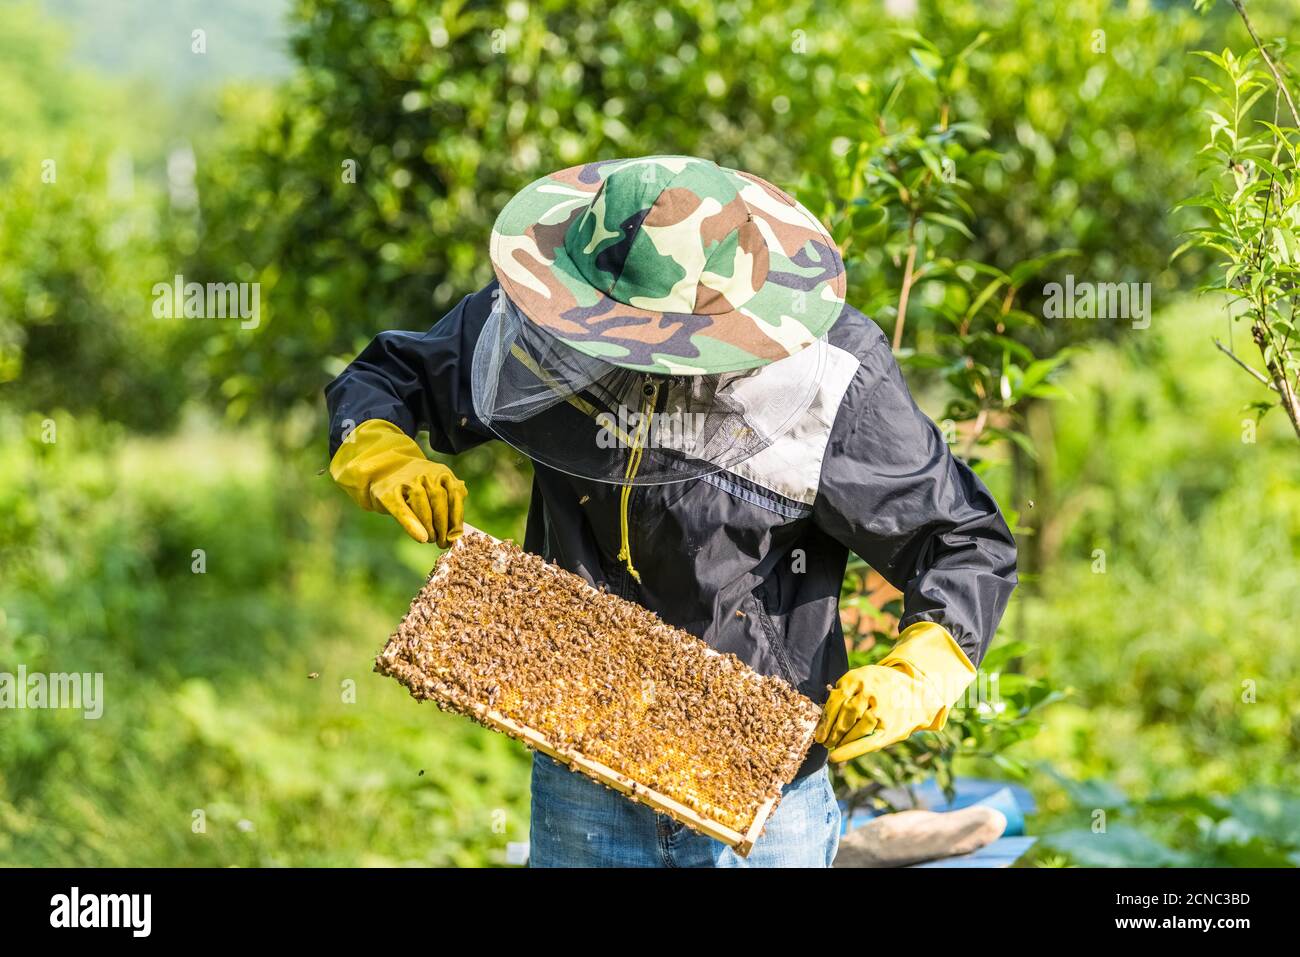 beekeeper working with bees and honeycomb Stock Photo